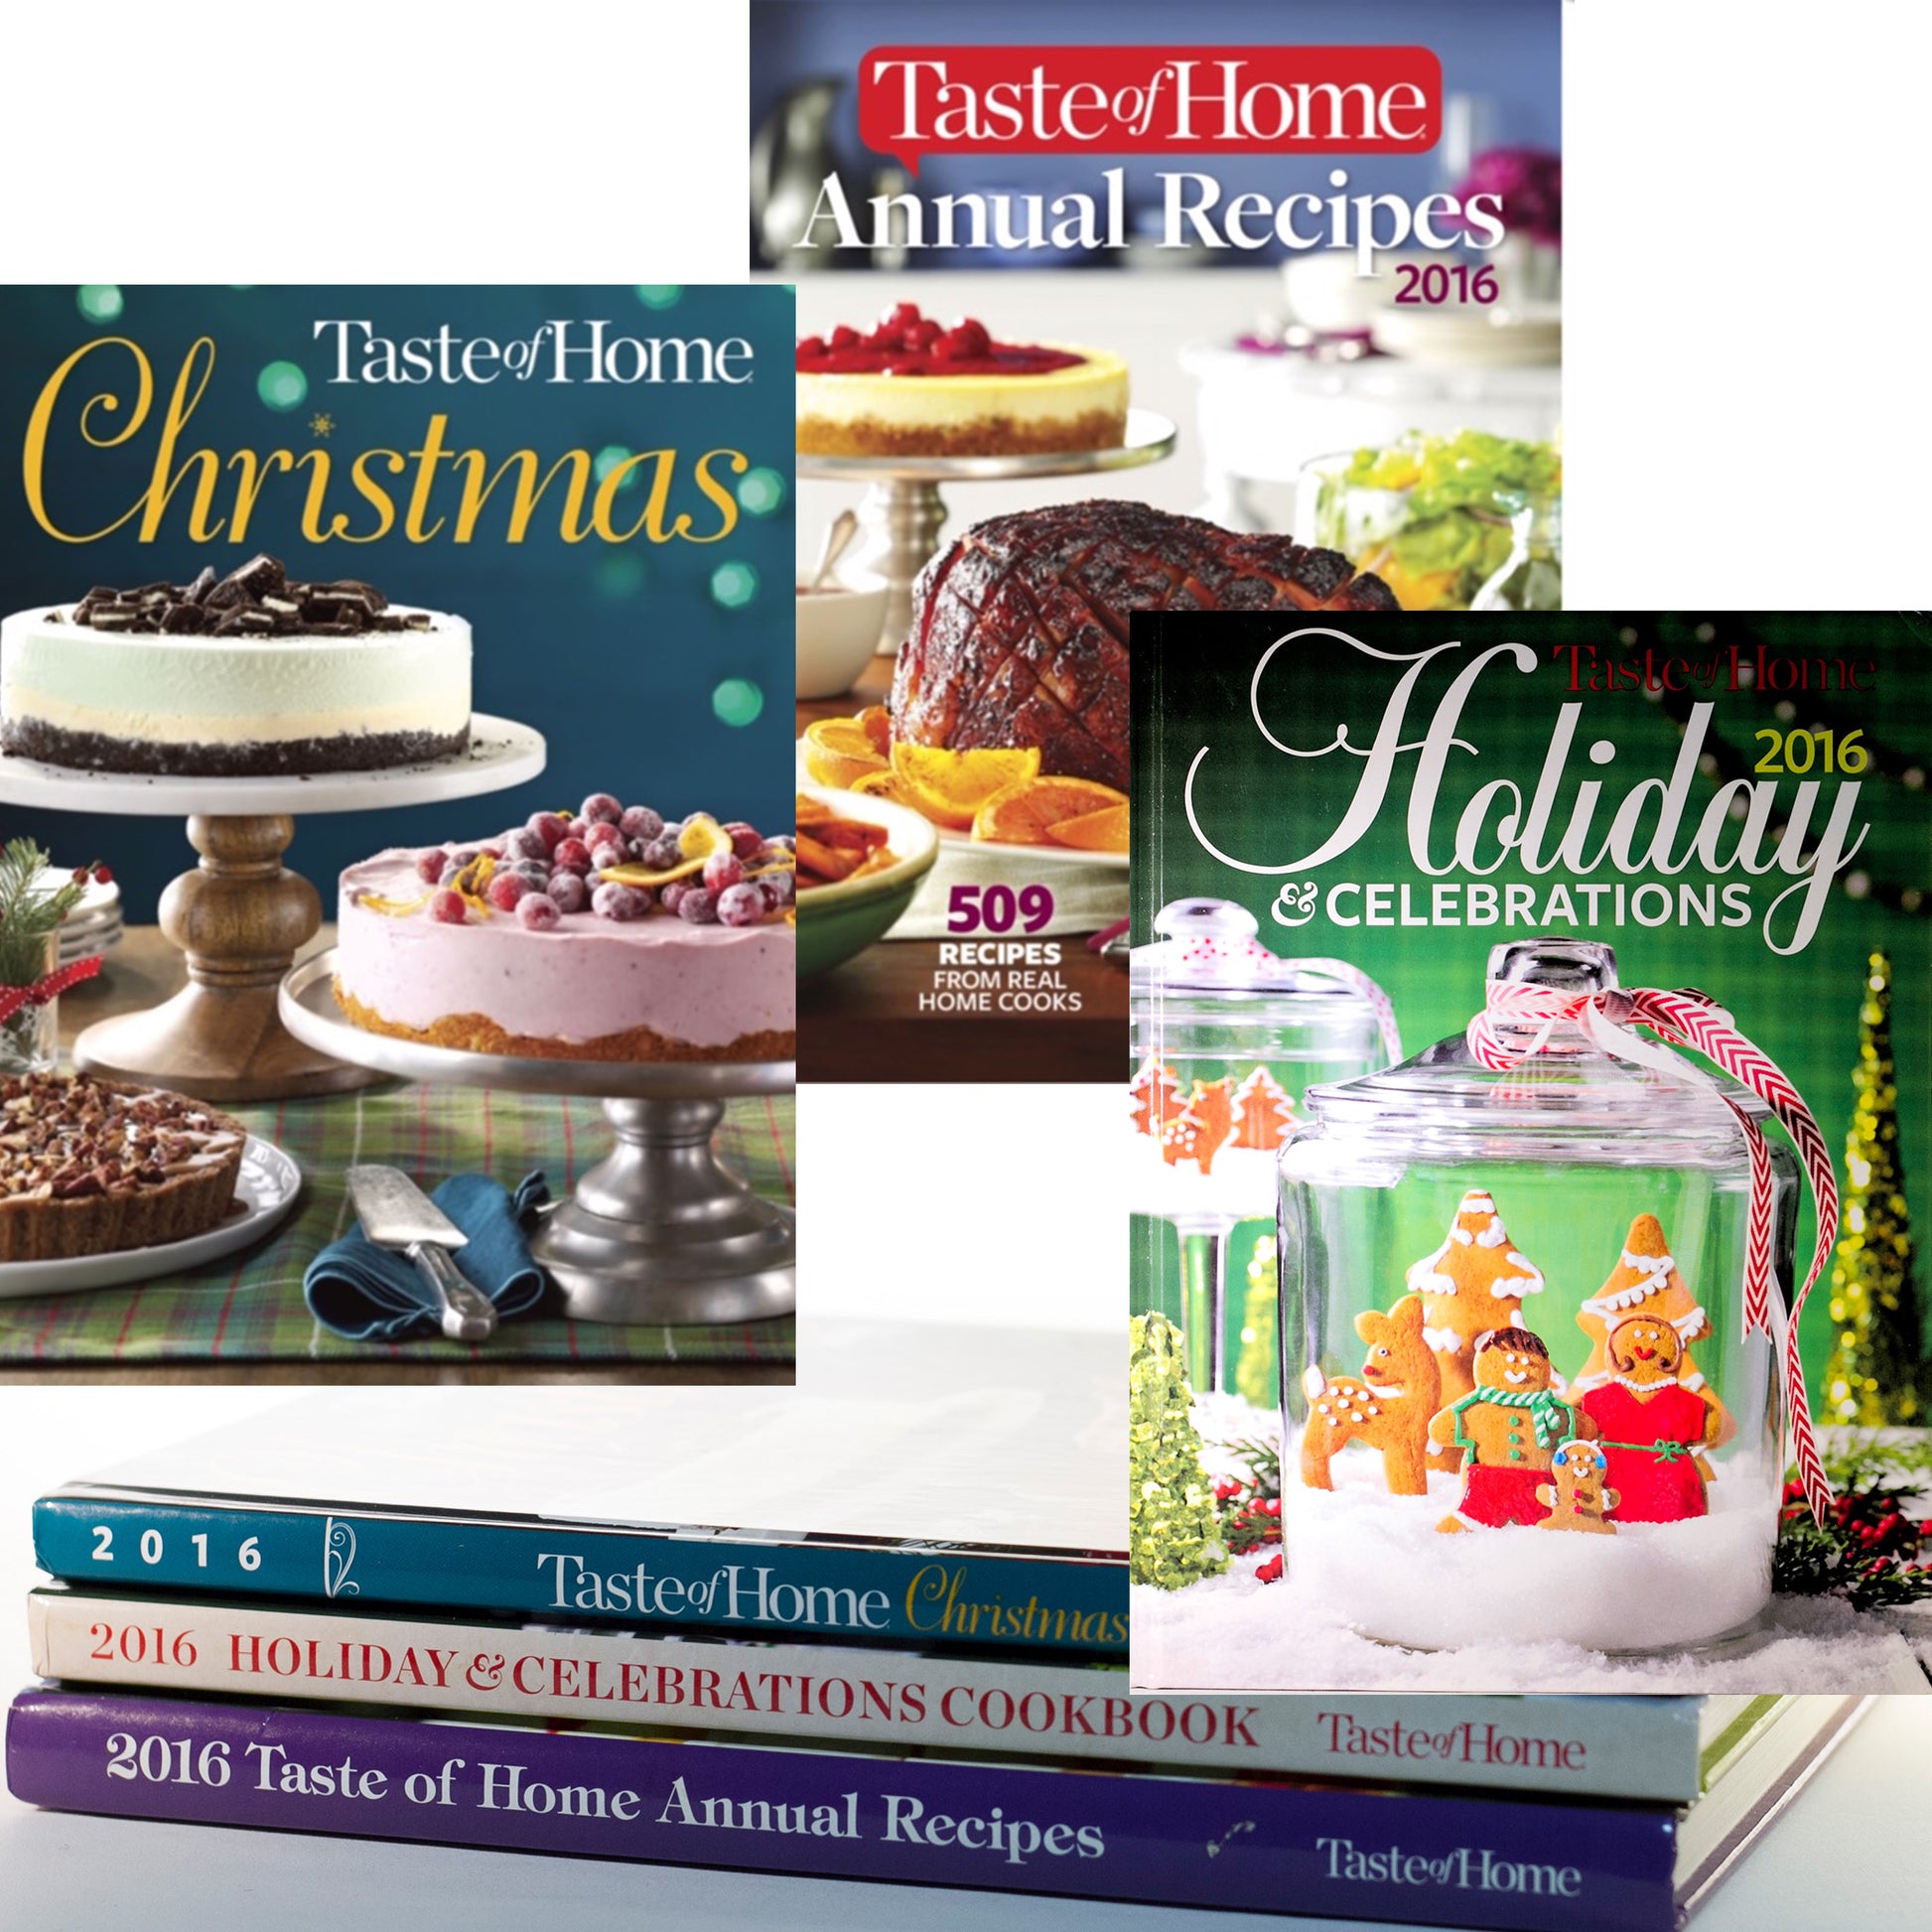 Three Volume Set 2016 TASTE OF HOME Collectible Series: Holiday & Celebrations, Christmas and Annual Recipes